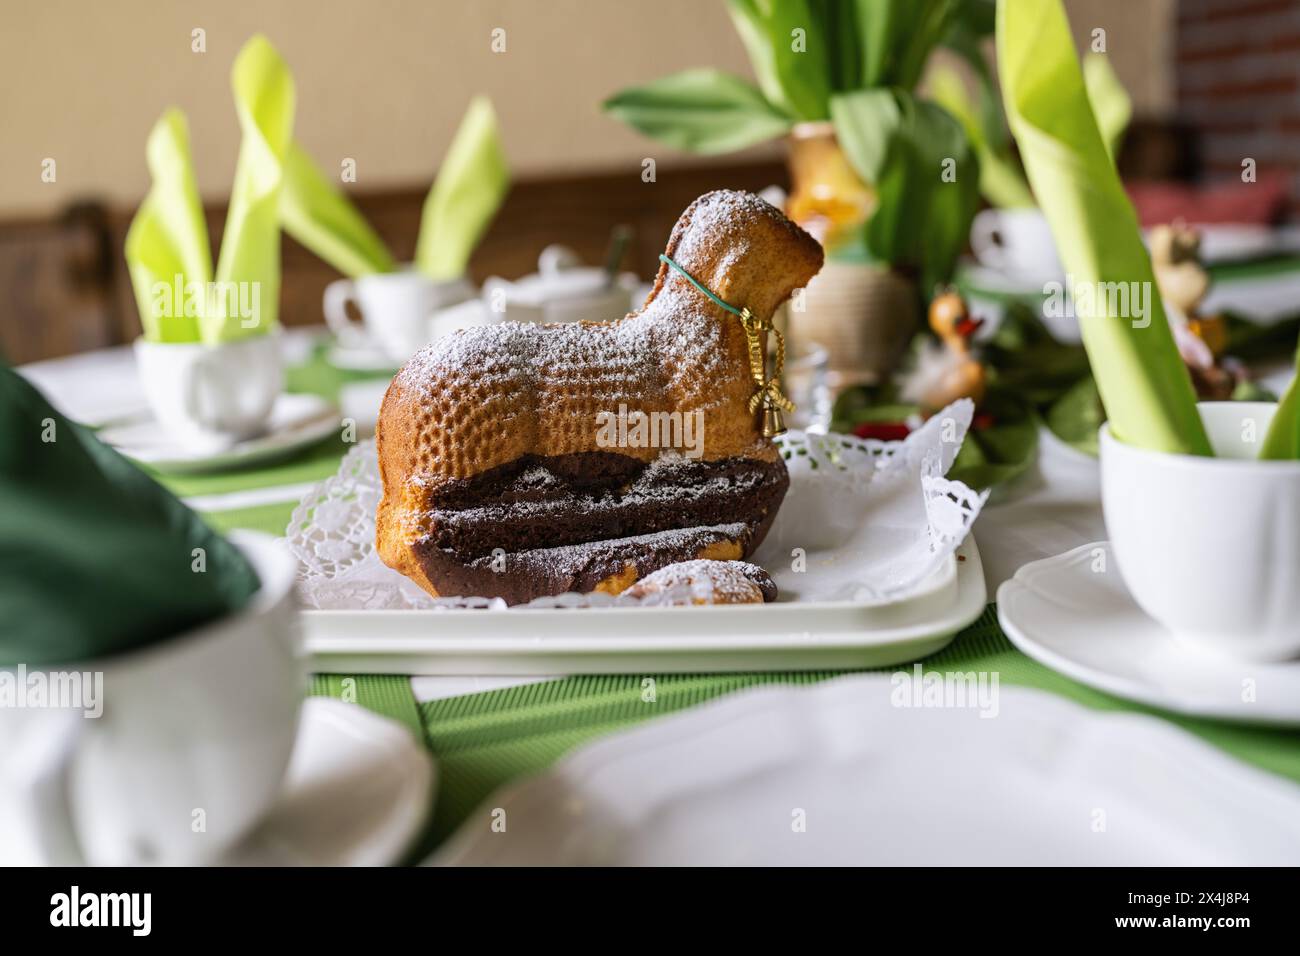 Easter cake shaped like a lamb, dusted with powdered sugar, on a festive table setting Stock Photo